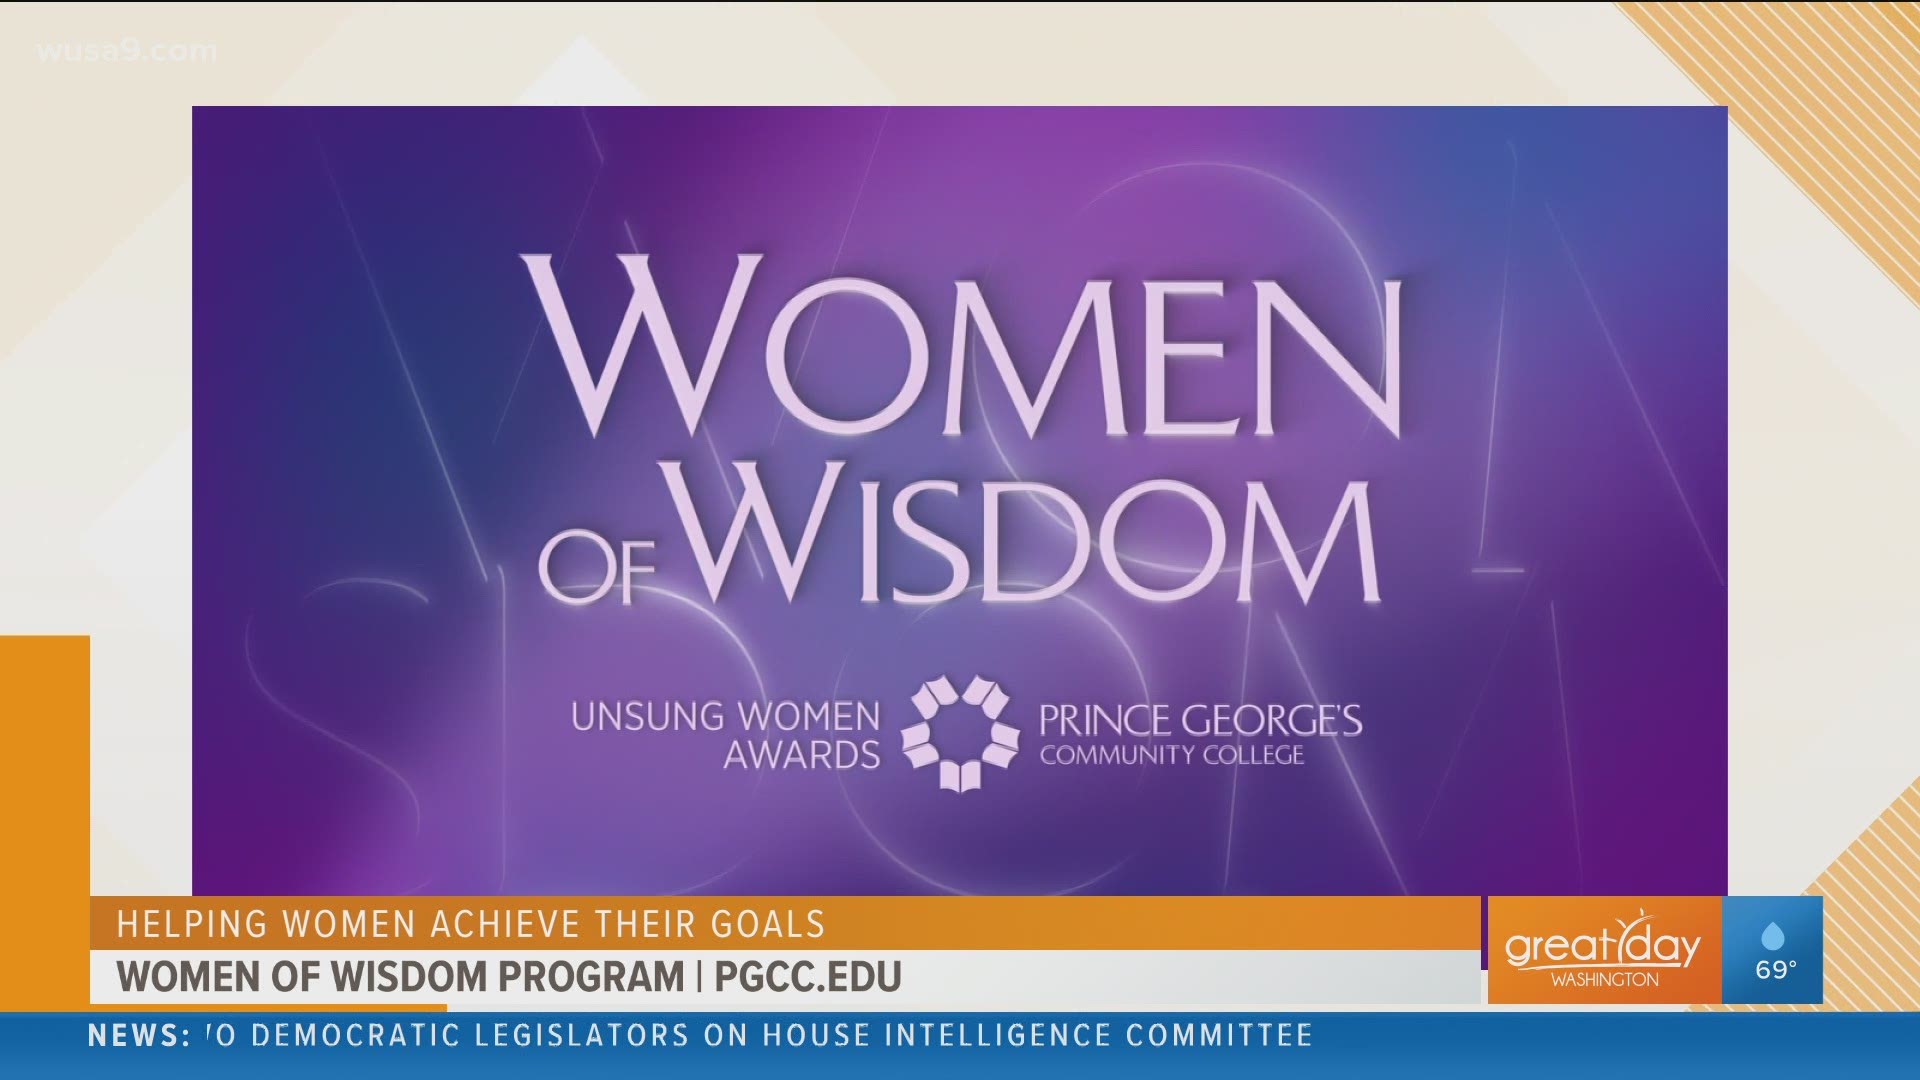 Sponsored by Prince George's Community College and the Women of Wisdom. Visit PGCC.edu for more information.